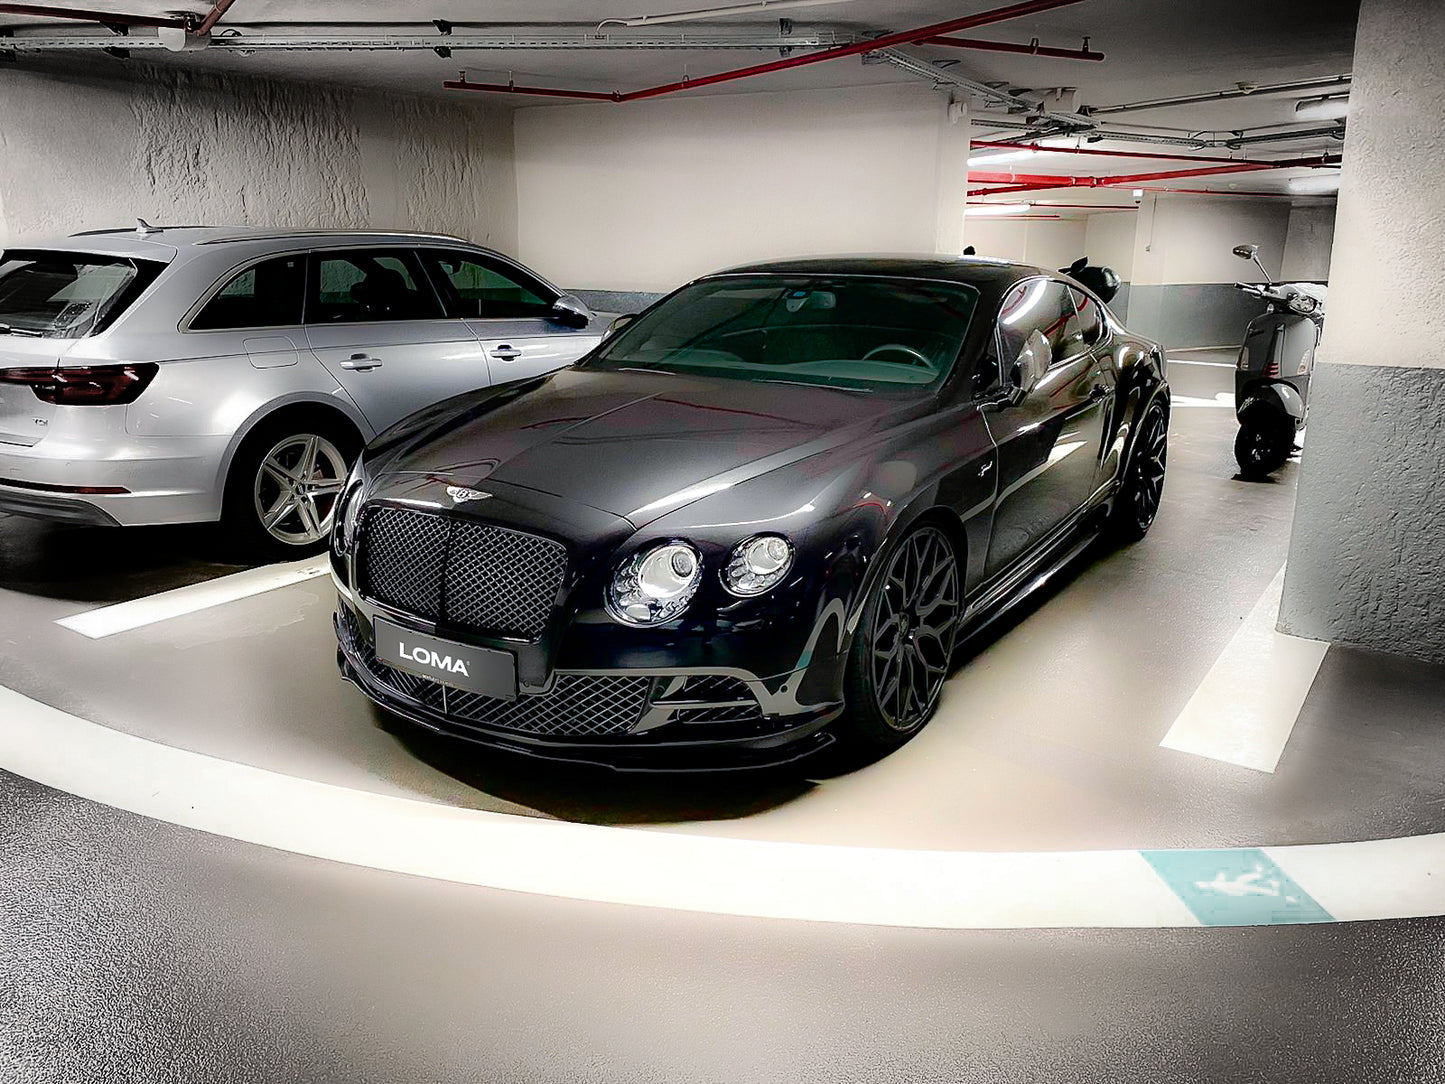 Luxury ride: Bentley Continental GT Speed with LOMA Forged BF1 wheels